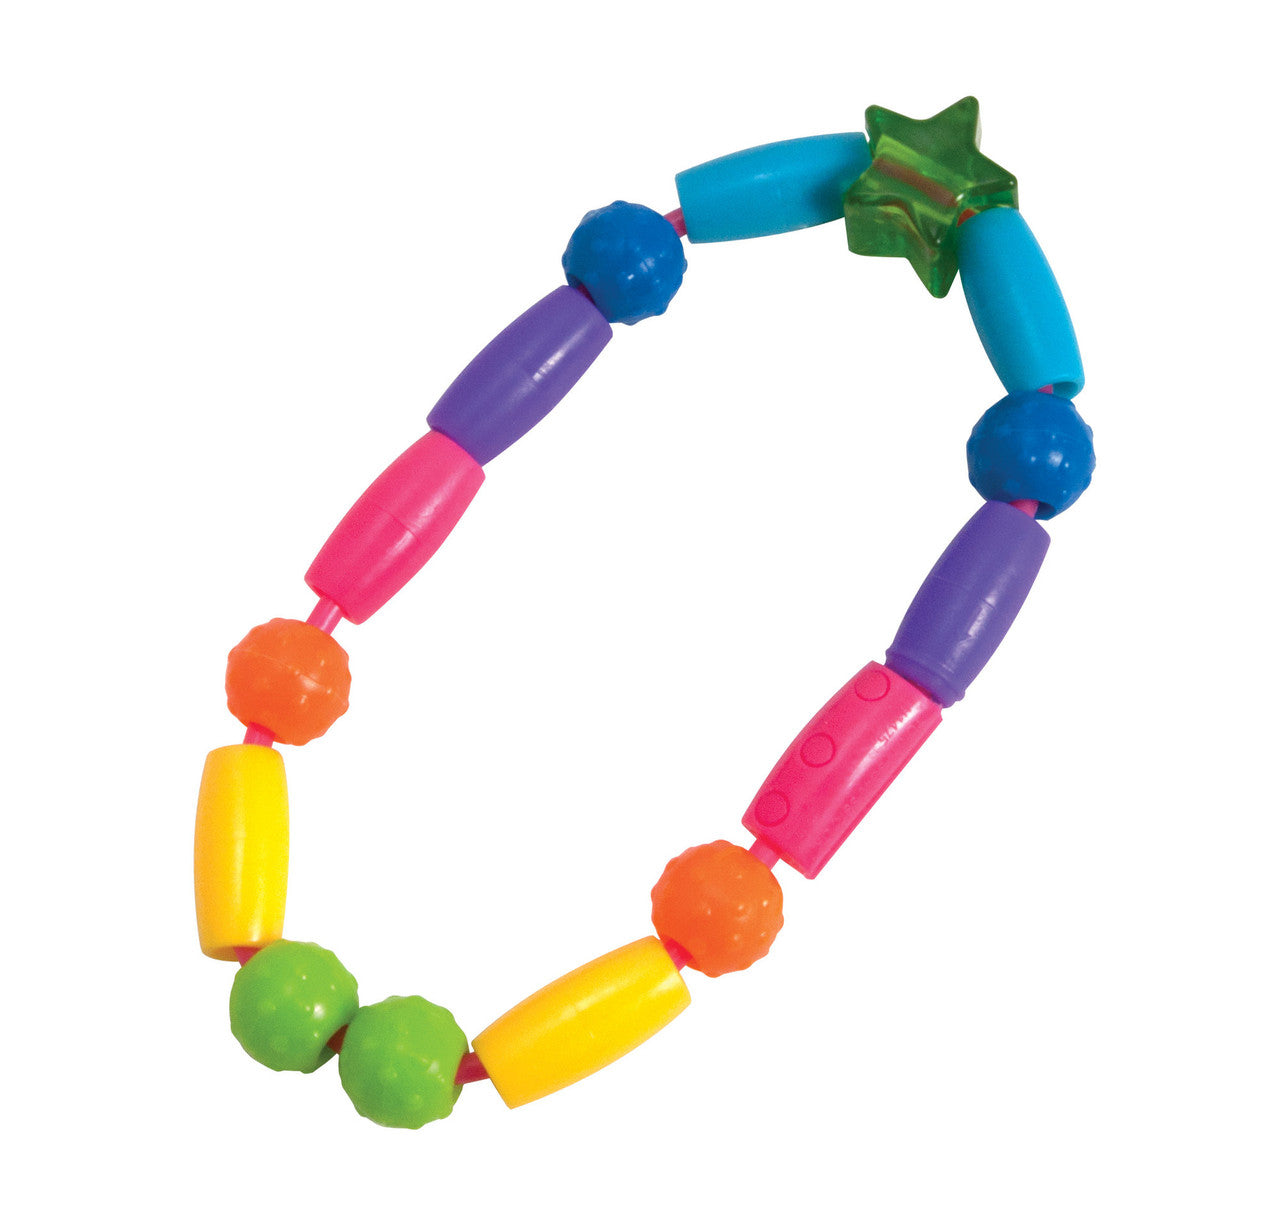 Bright Beads Teether